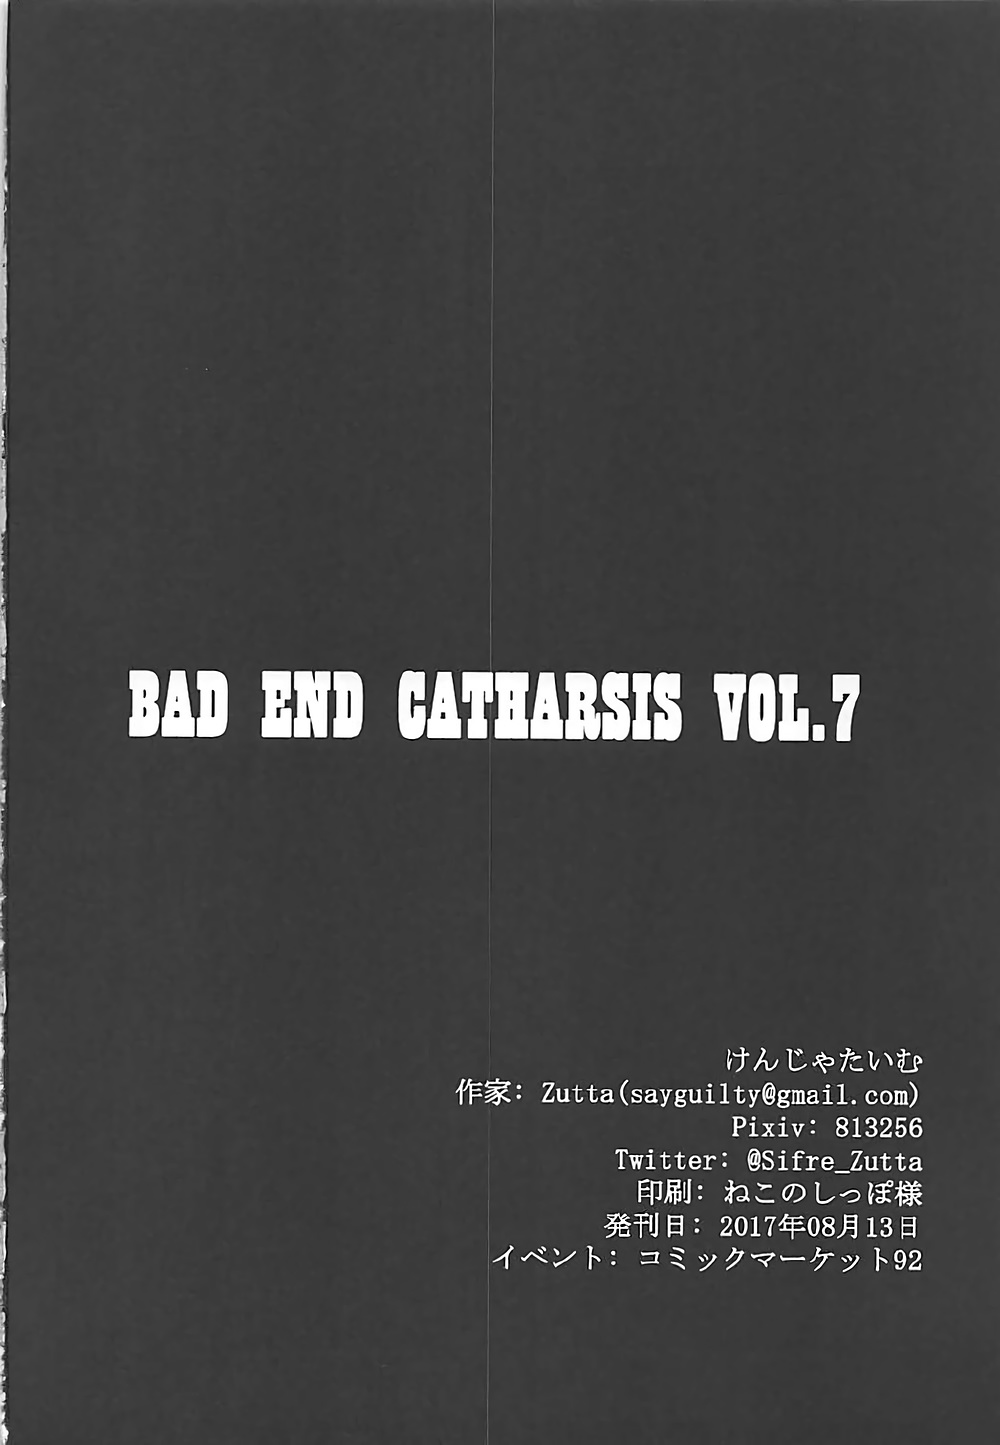 (C92) [けんじゃたいむ (Zutta)] Bad End Catharsis Vol.7 (Fate/Grand Order)